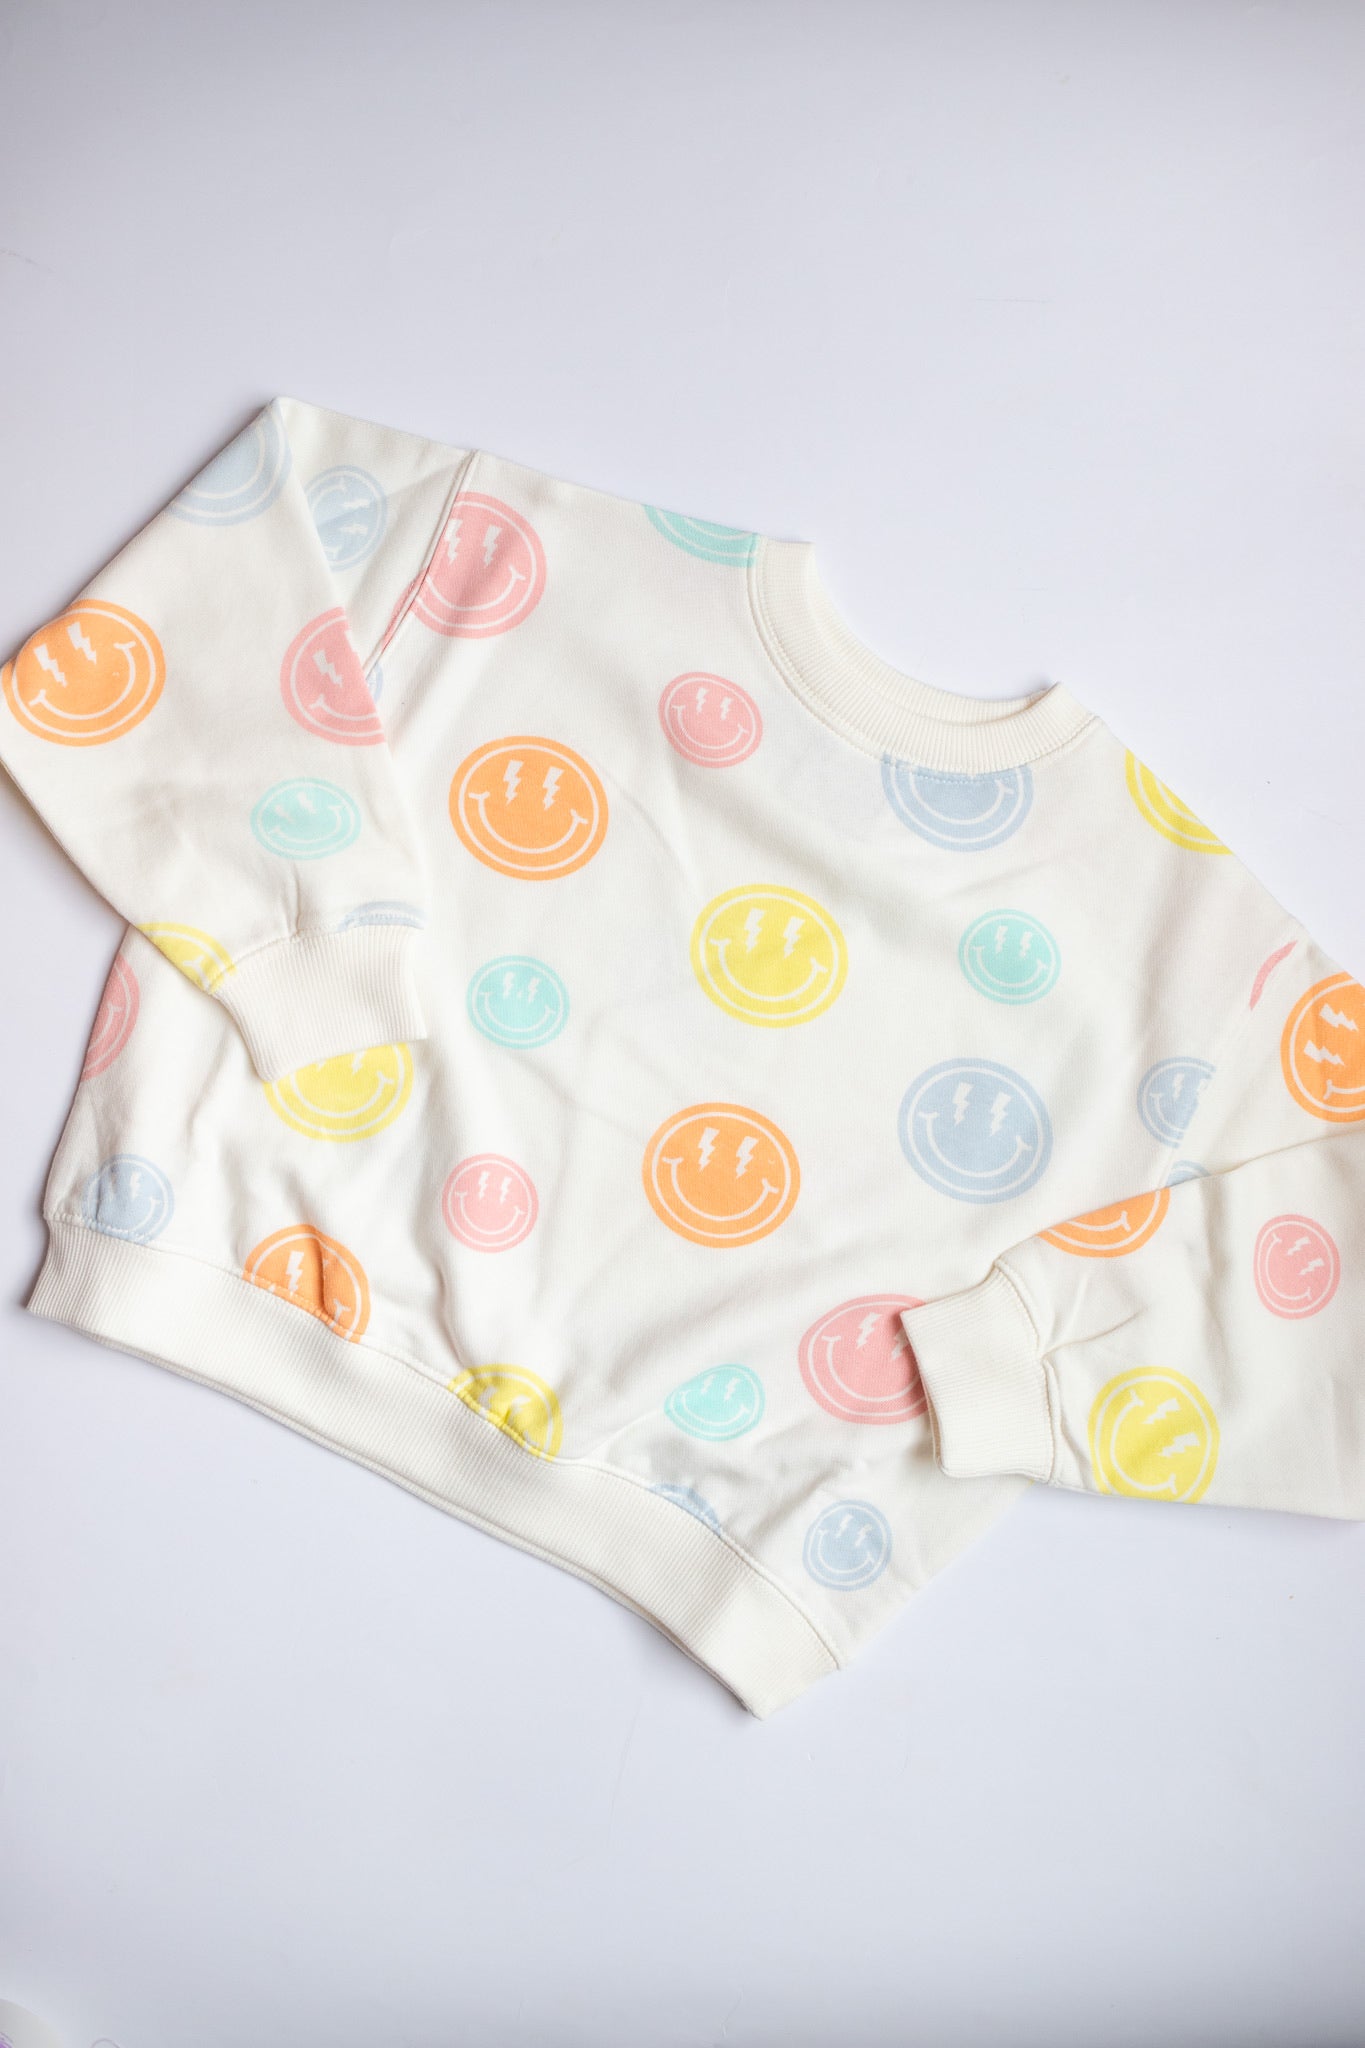 XOXO by magpies | All Over Rainbow Smiles | Kids